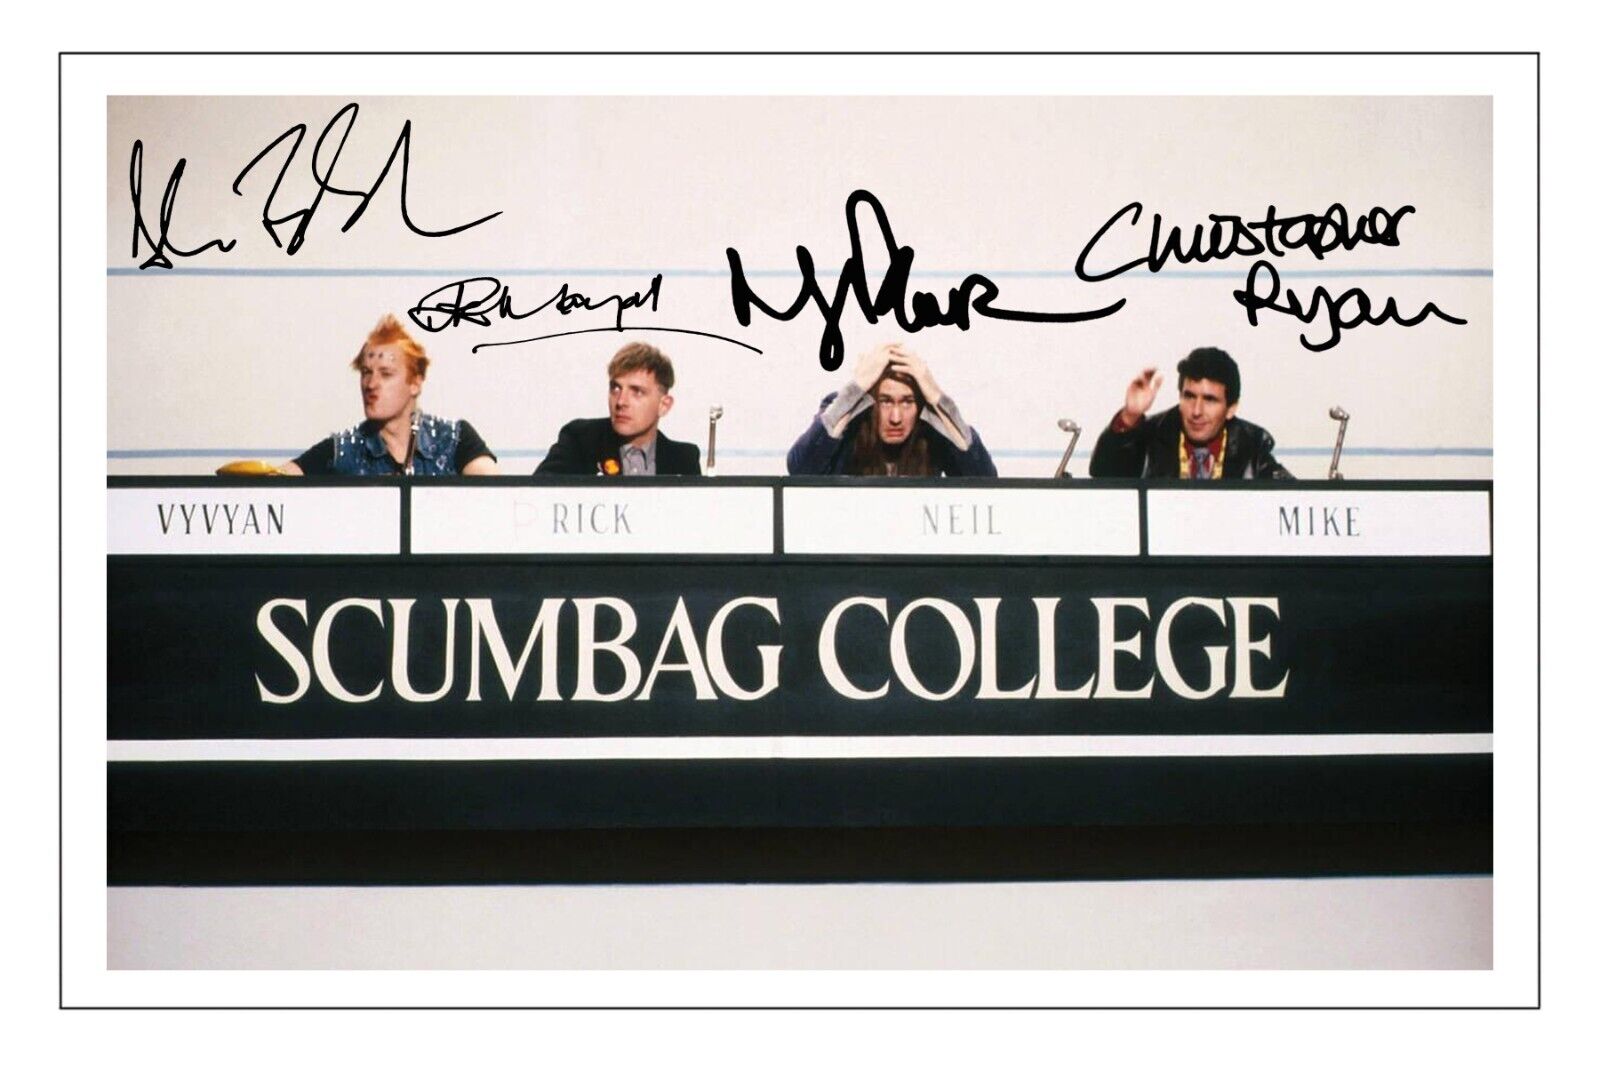 THE YOUNG ONES  Fully Signed 6x4 PHOTO Autograph Gift Pre Print Signatures